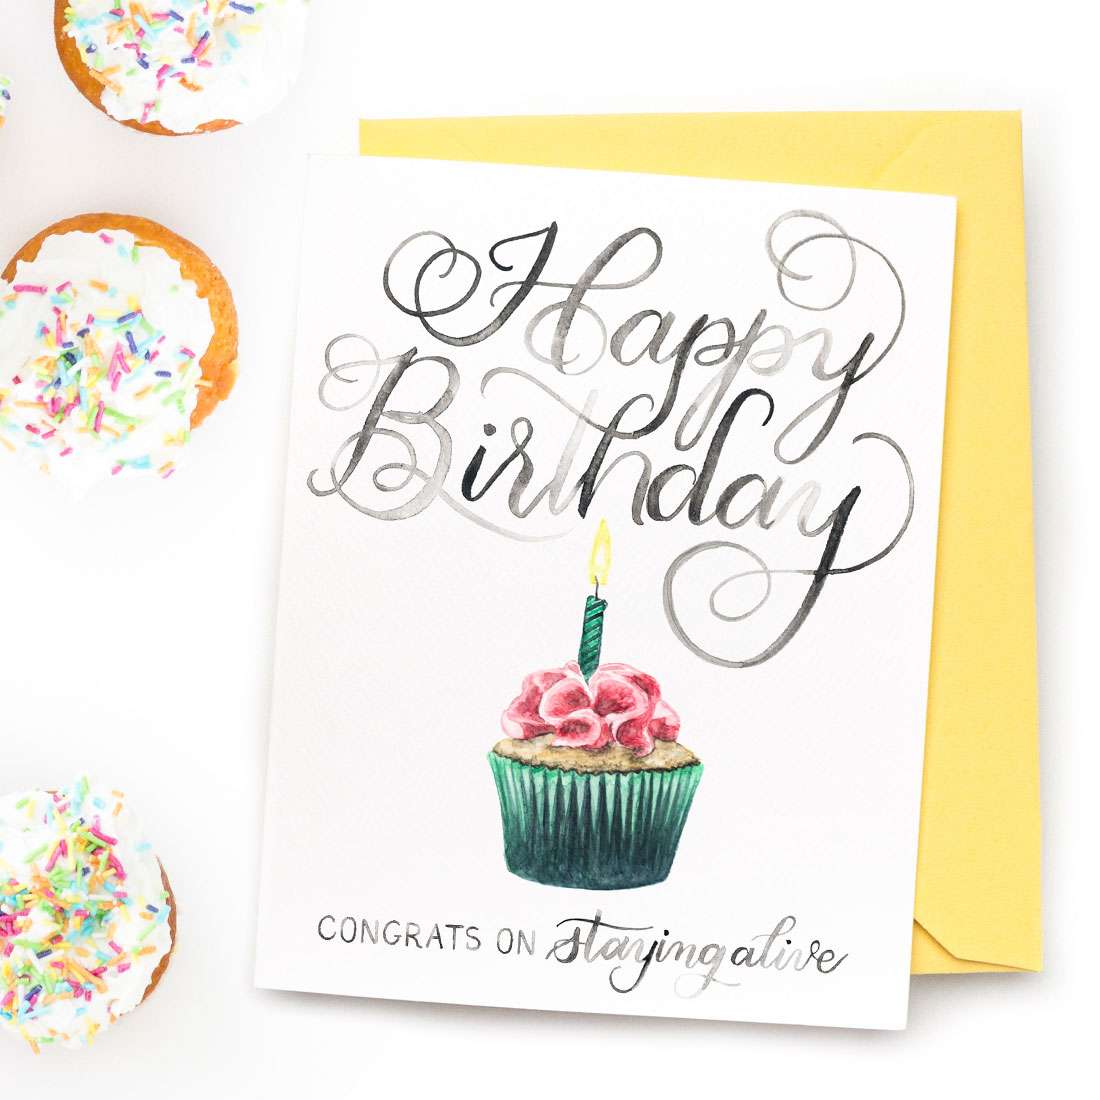 A hand-lettered watercolor card saying "Happy Birthday... congrats on staying alive" with a painted cupcake with one lit candle by CharmCat | charmcat.net